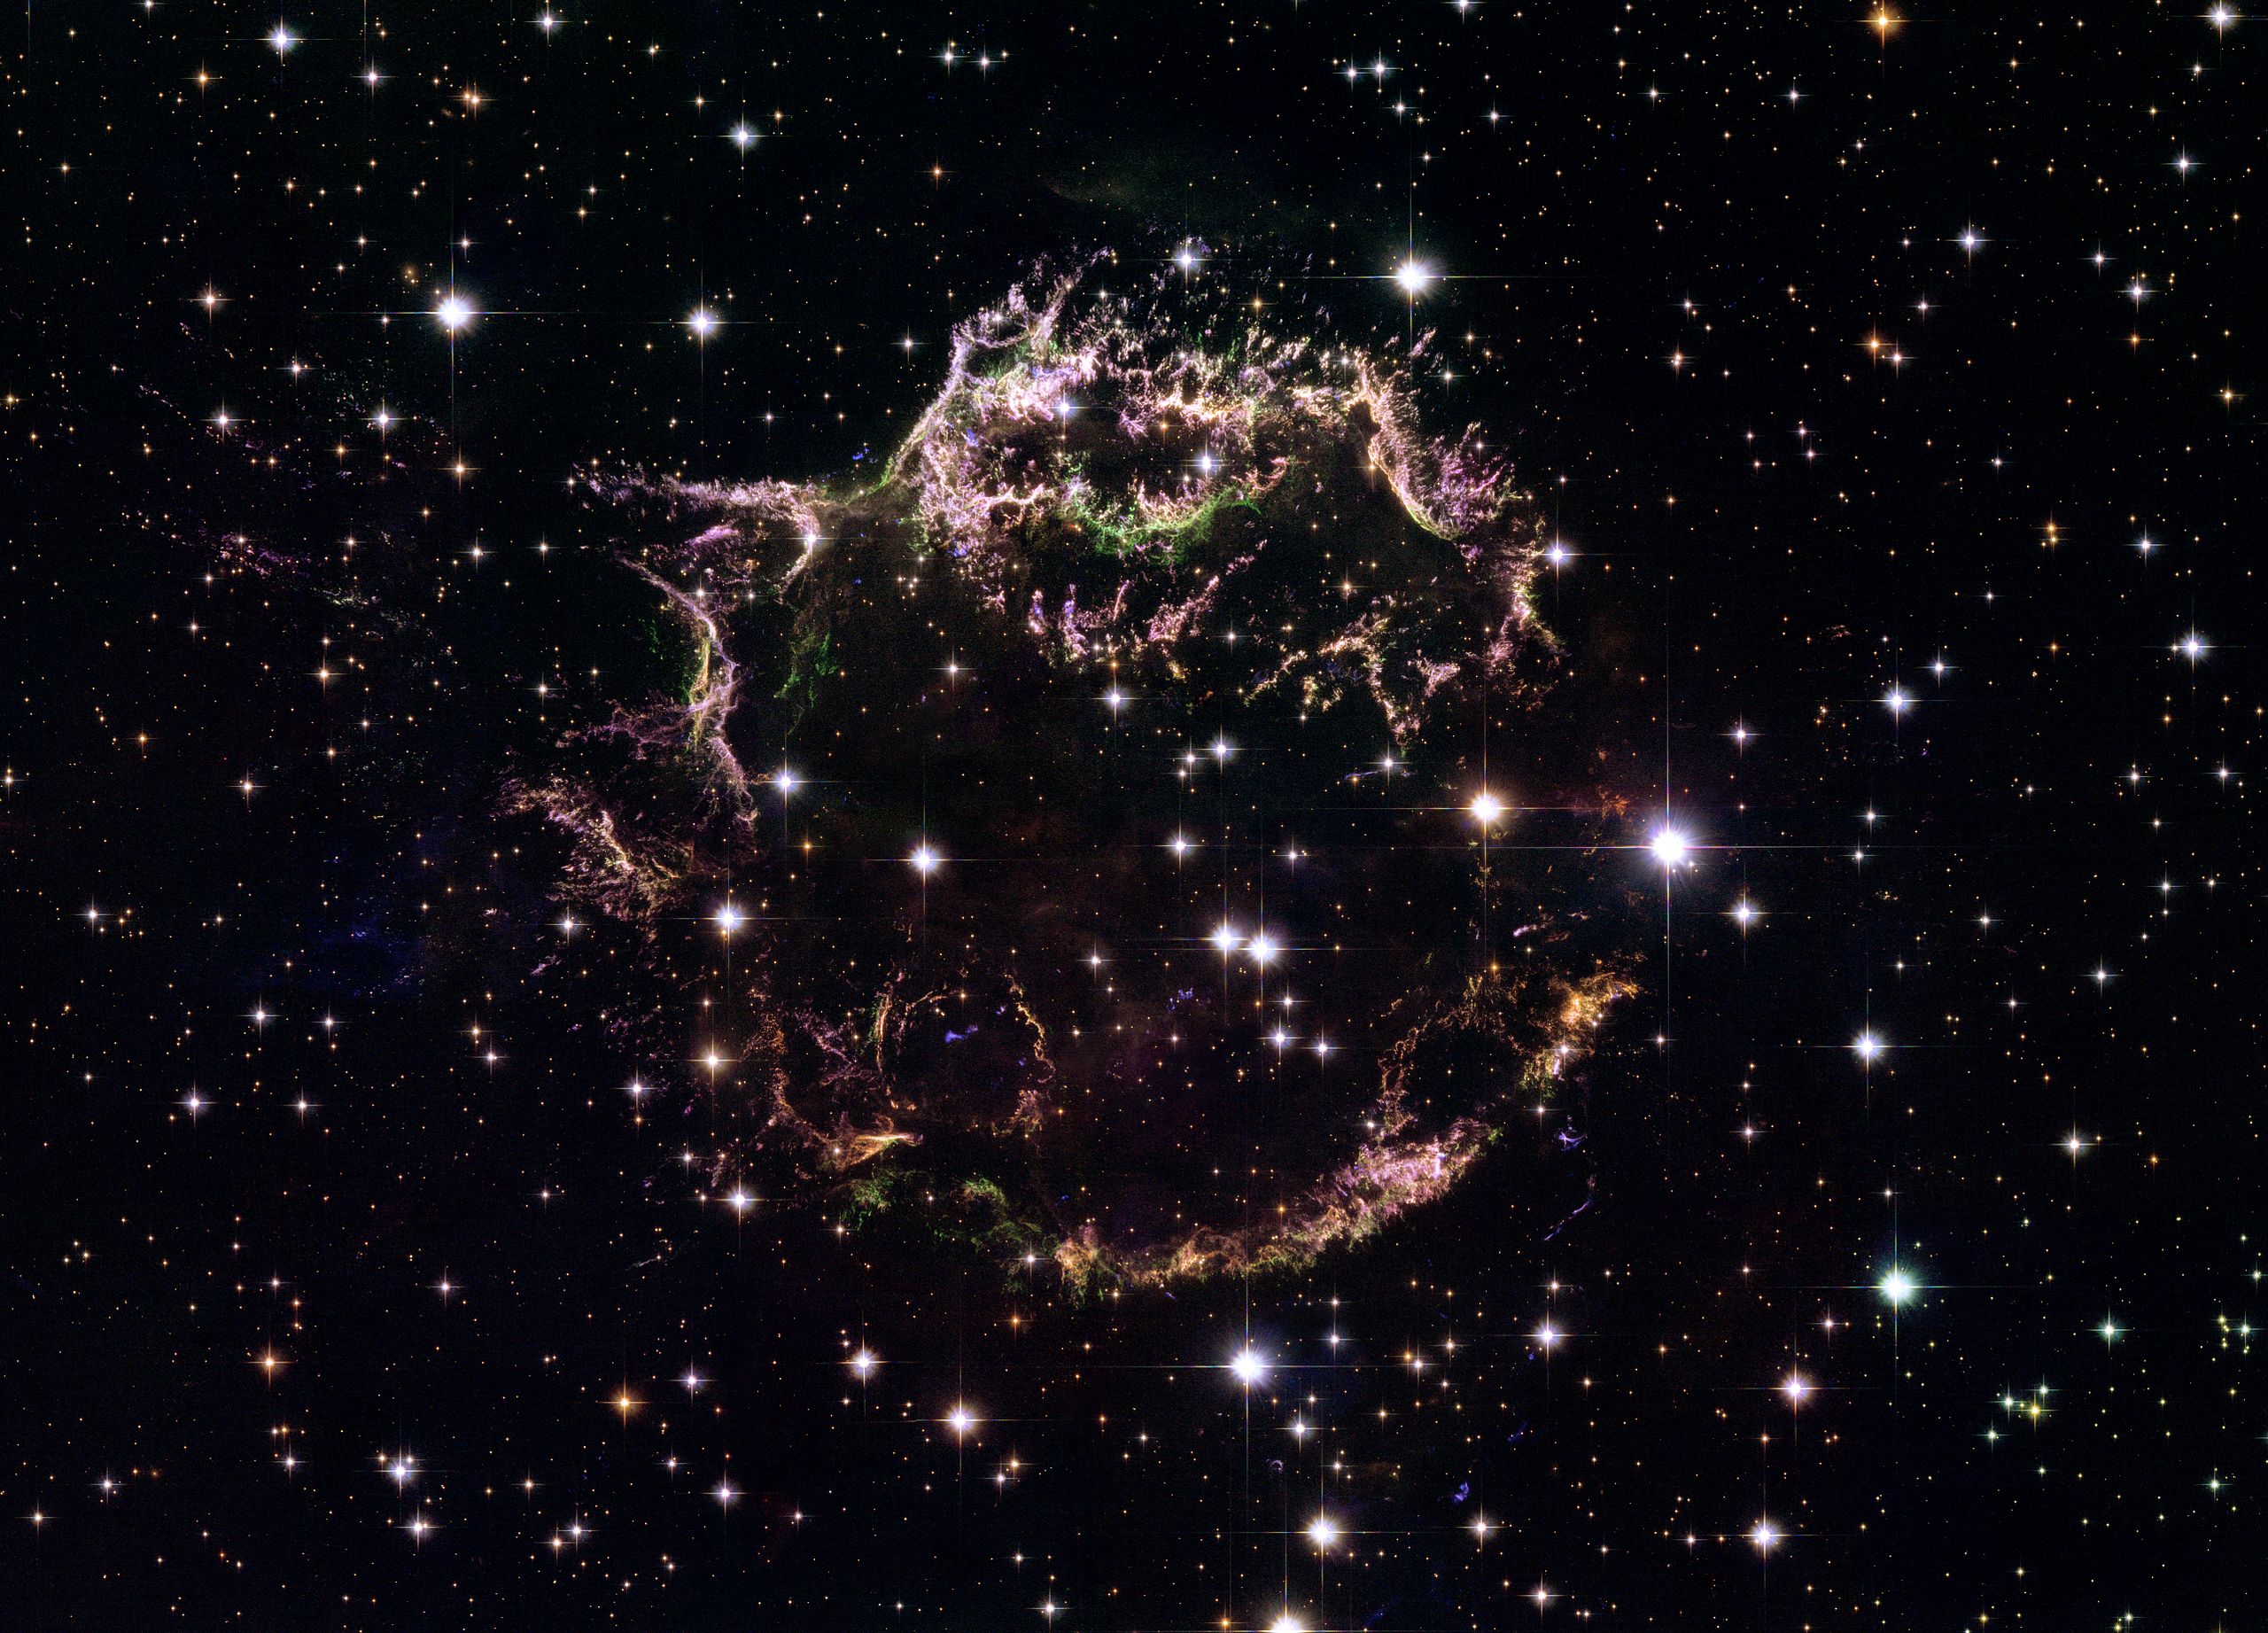 cassiopeia a supernova remnant visible hubble